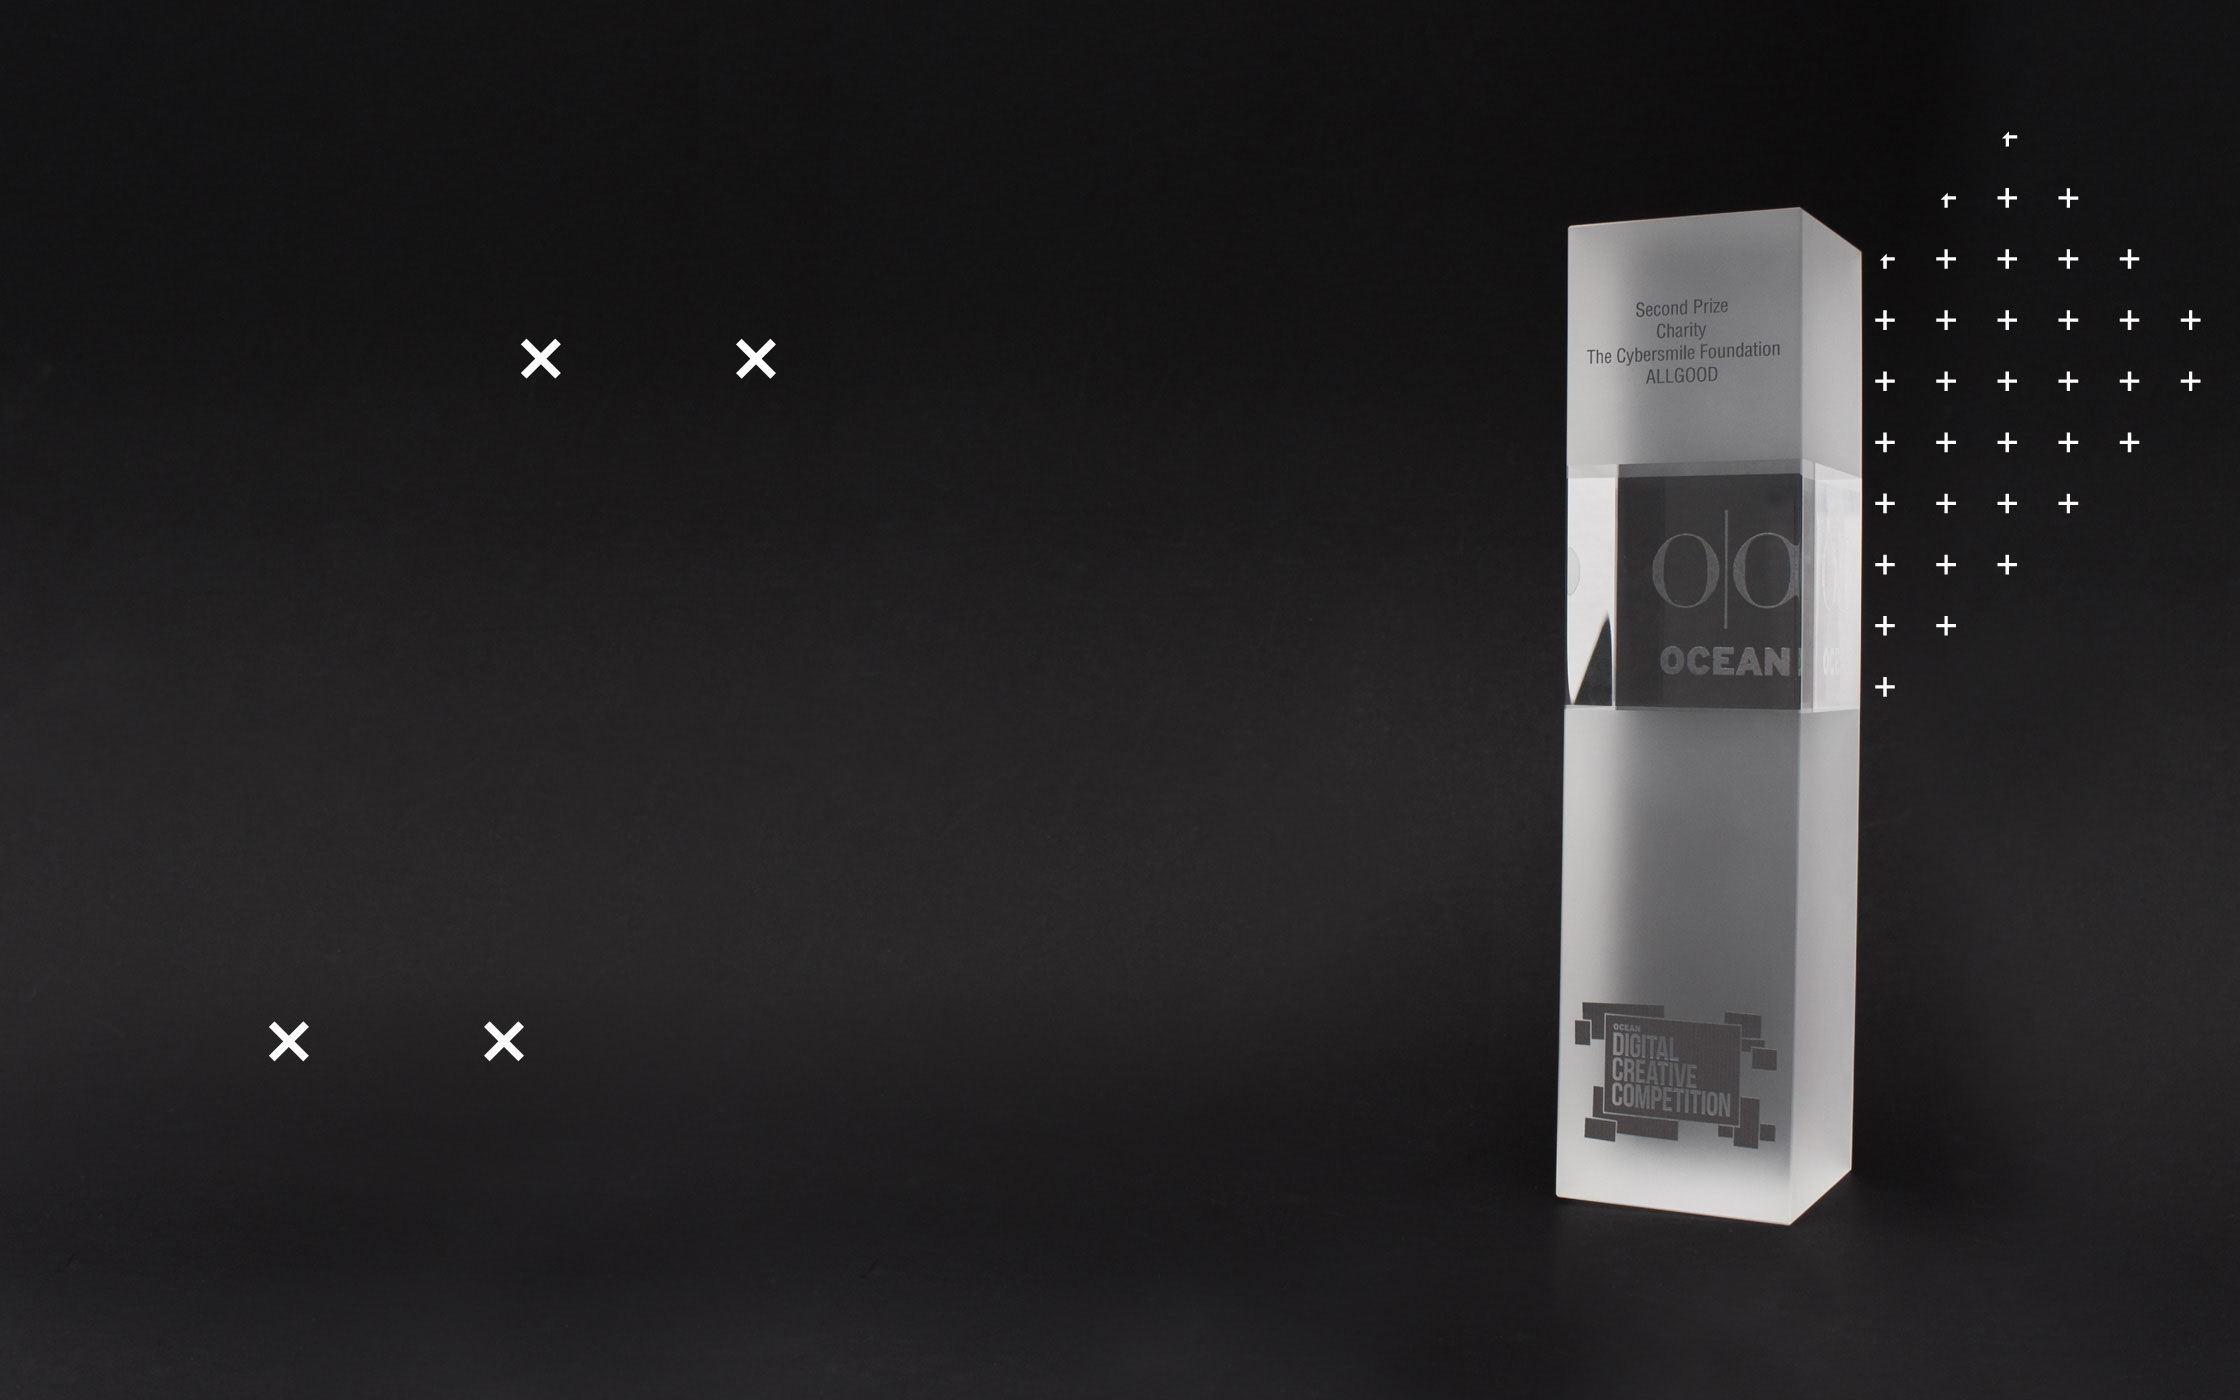 ALLGOOD win 2nd prize of £75,000 at Ocean’s Digital Creative Competition